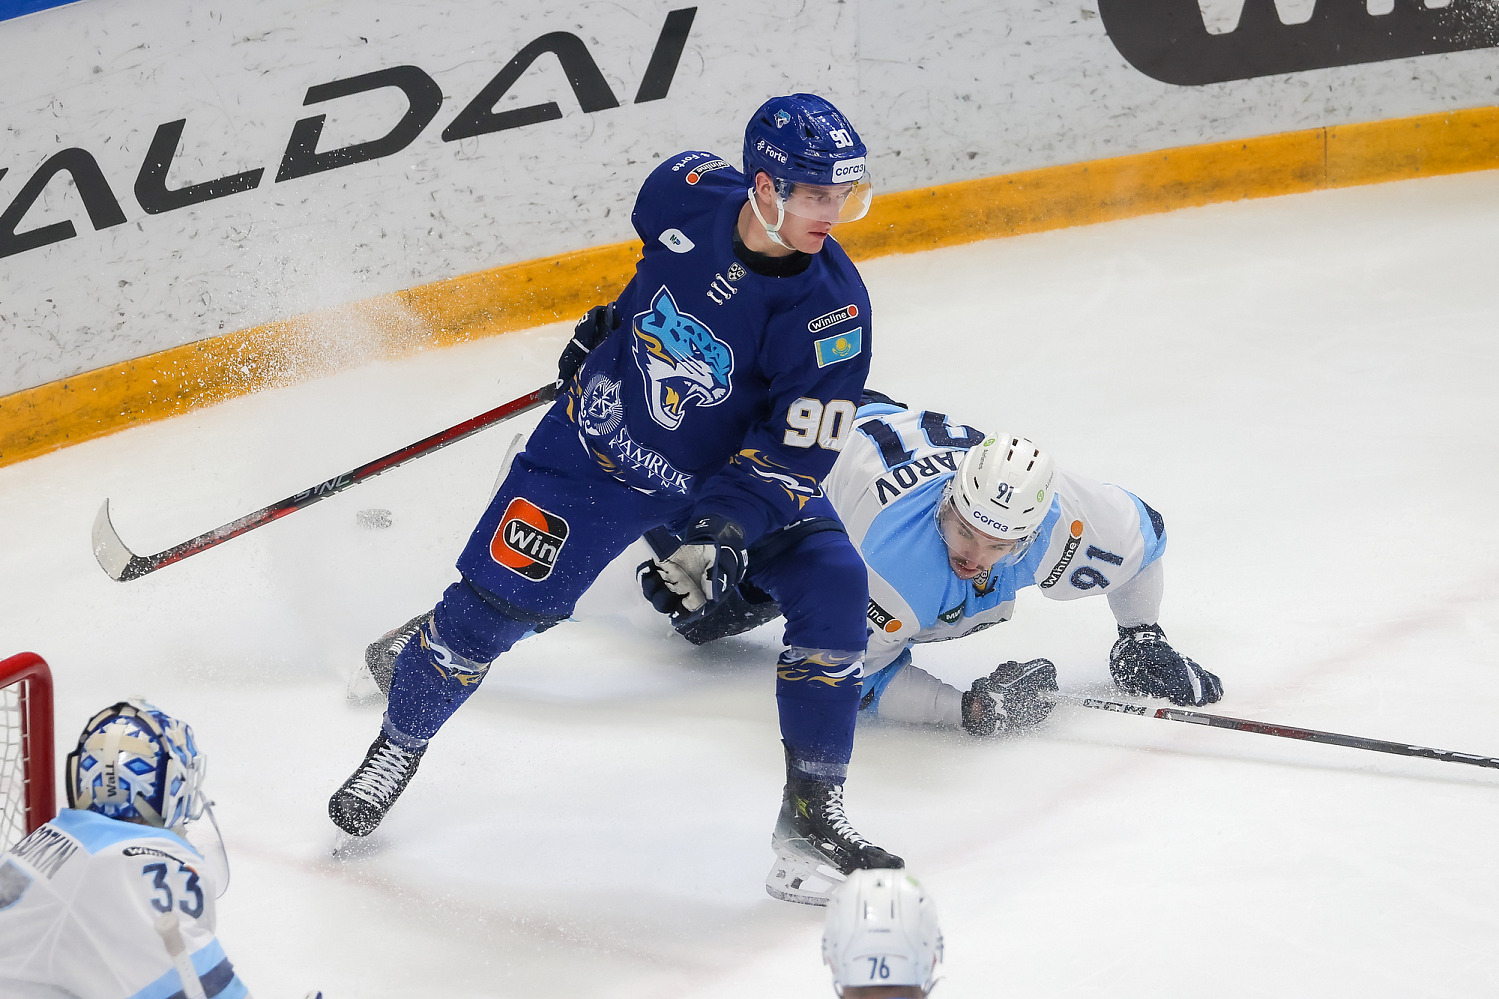 Barys' best players according to smart puck data